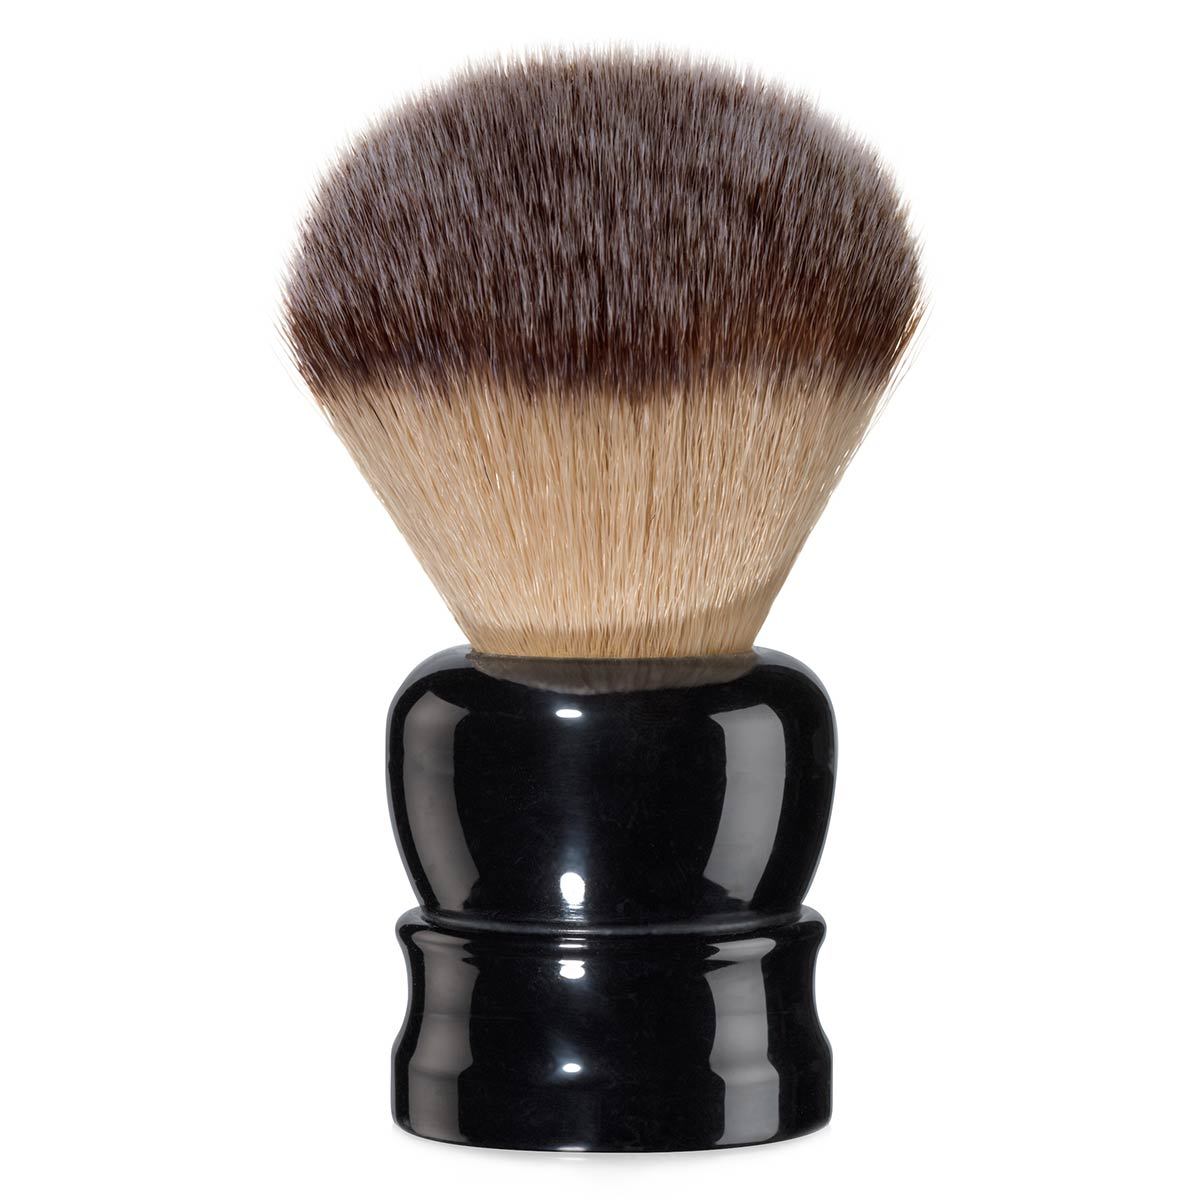 Primary image of Fine Accoutrements Stout Angel Hair Shave Brush - Black 24mm Shave Brush